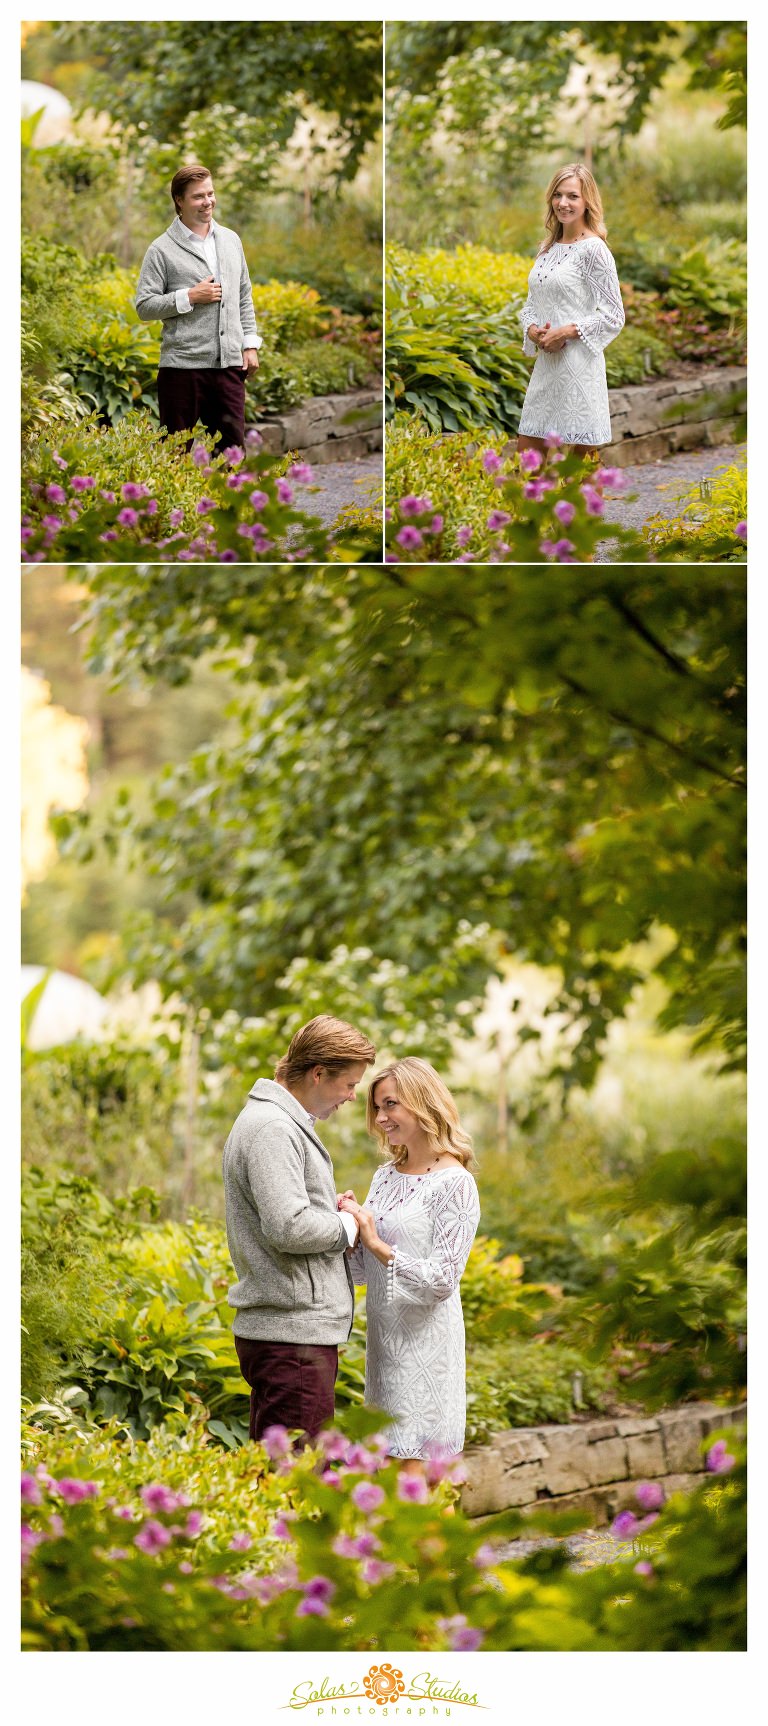 Solas-Studios-Engagement-Session-Ithaca-NY-4